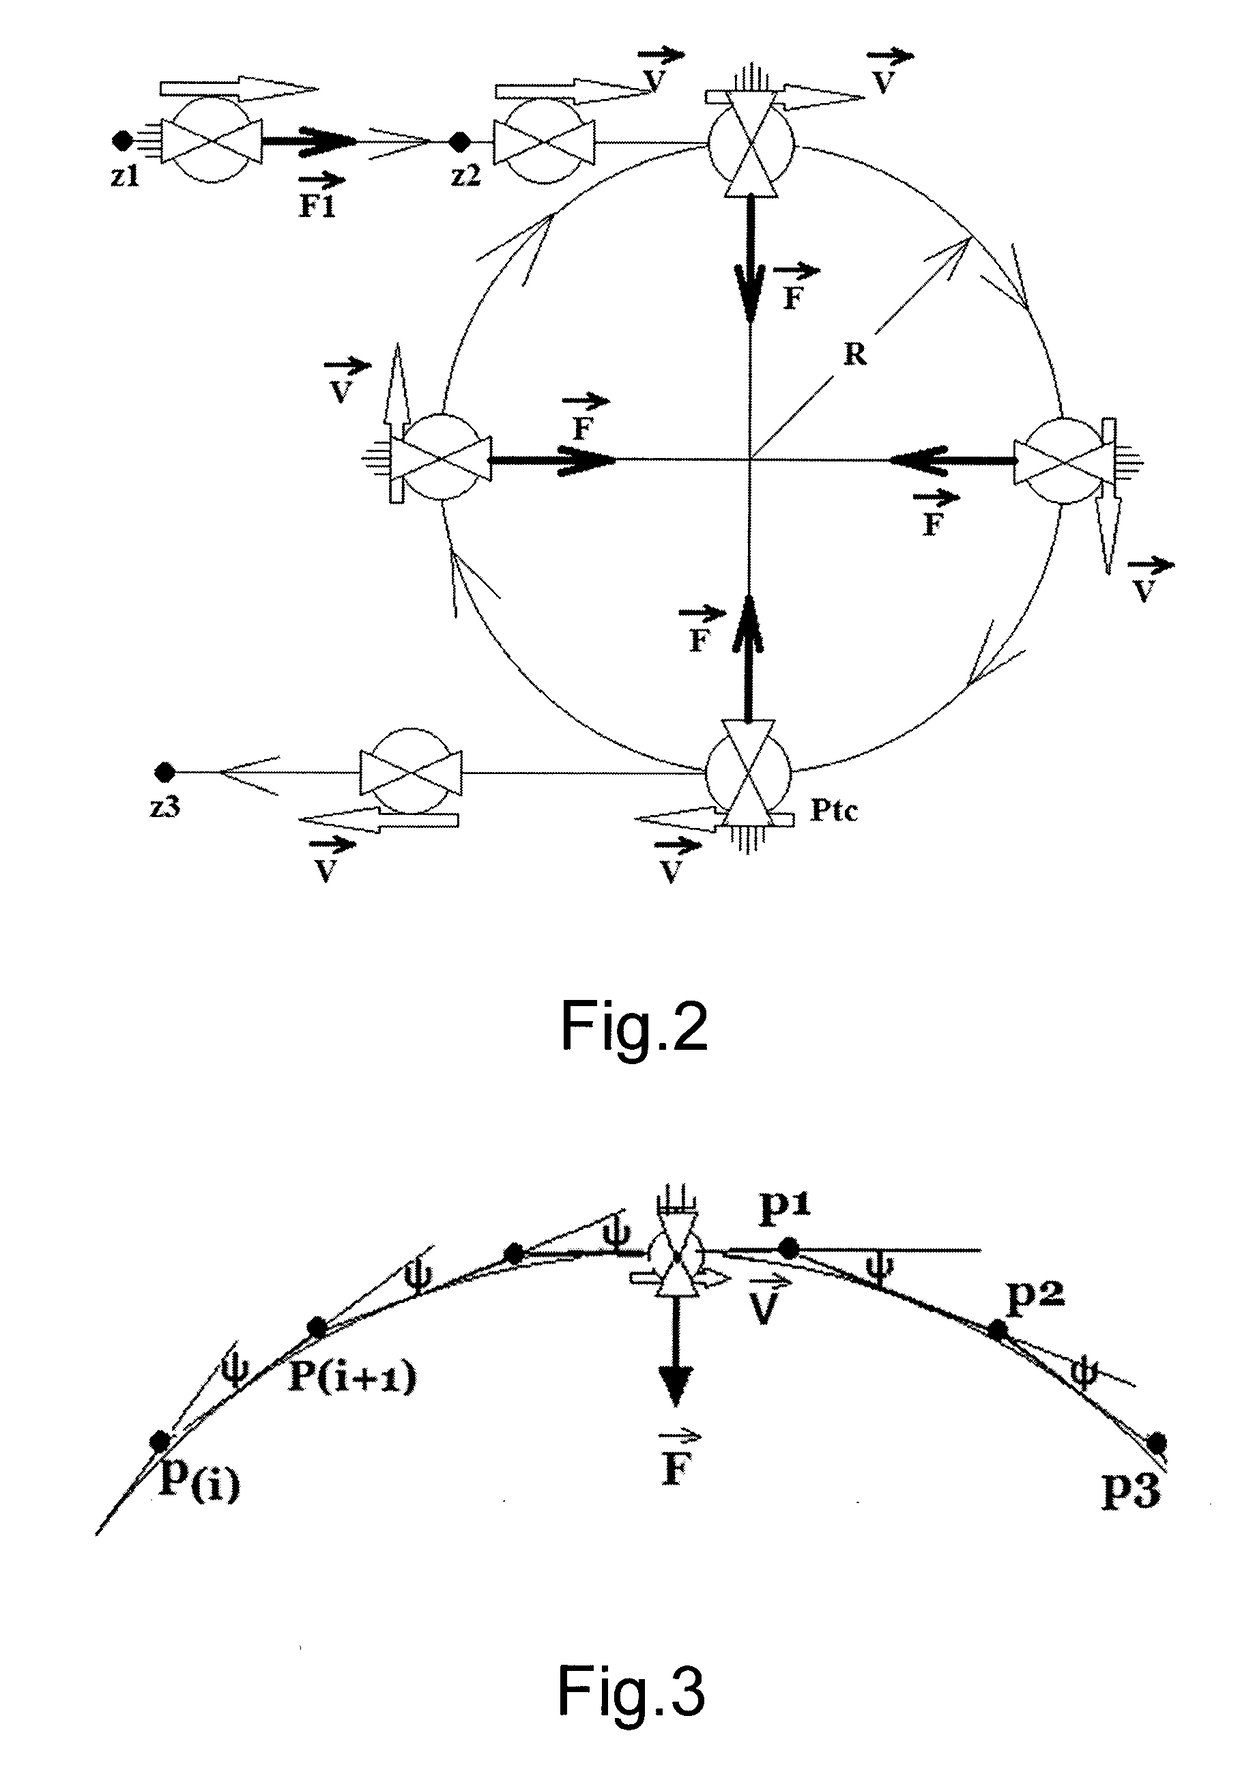 Machine generating centrifugal forces from eccentrics with variable radius